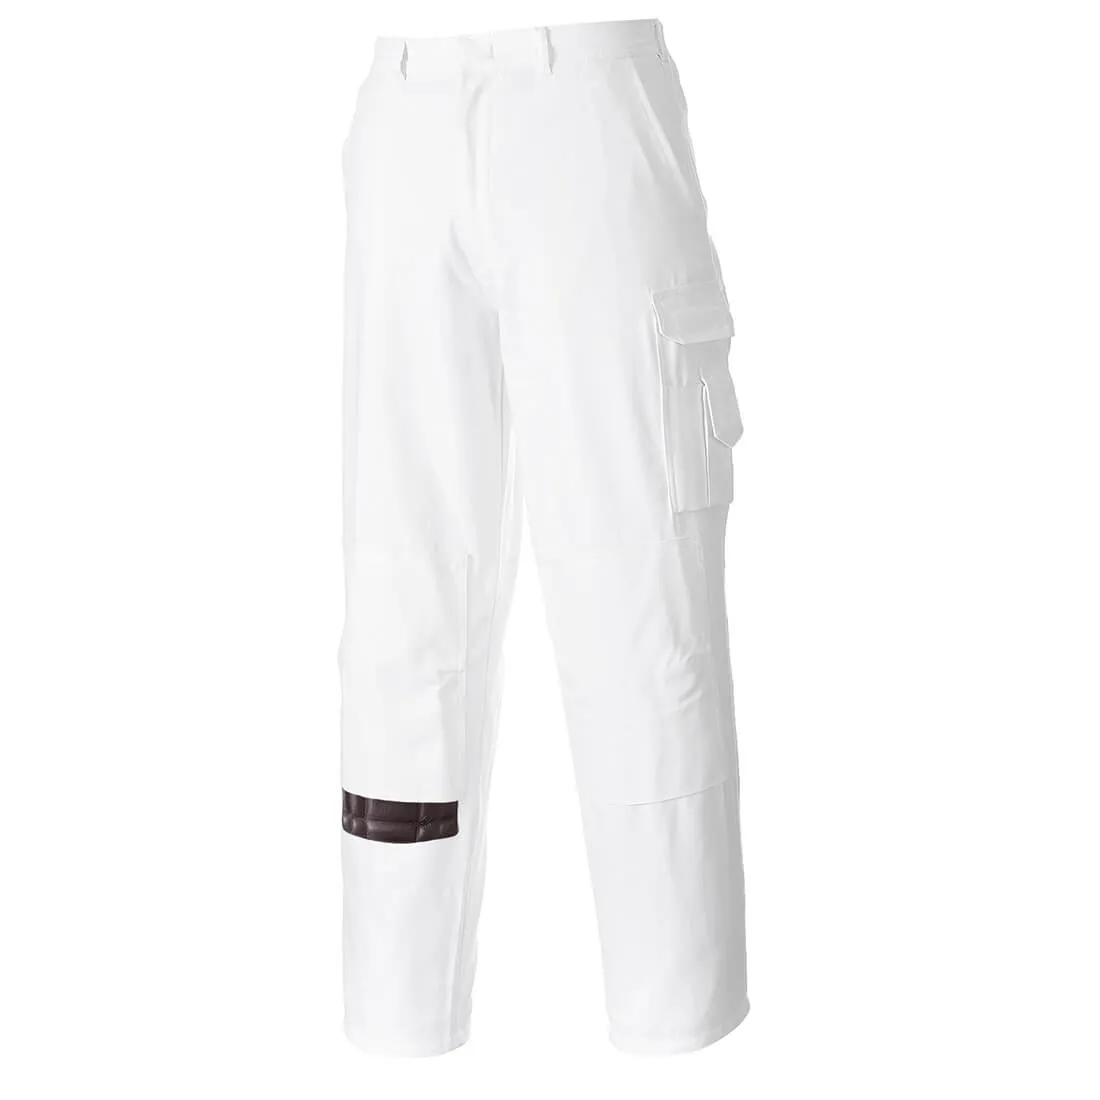 Portwest Painters Trousers - White, Small, 31"